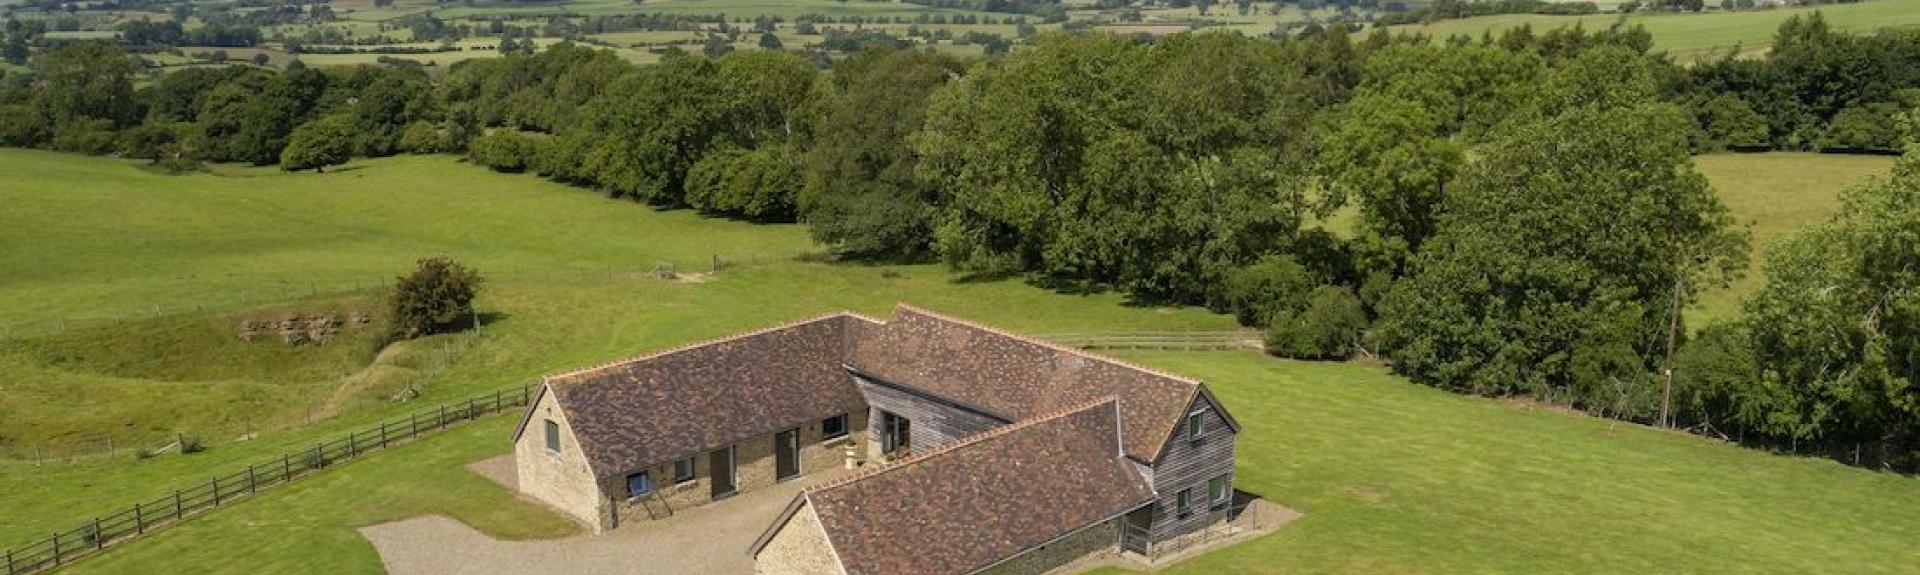 Aerial image of a Shropshire holiday barn surrounded by open fields and woods.